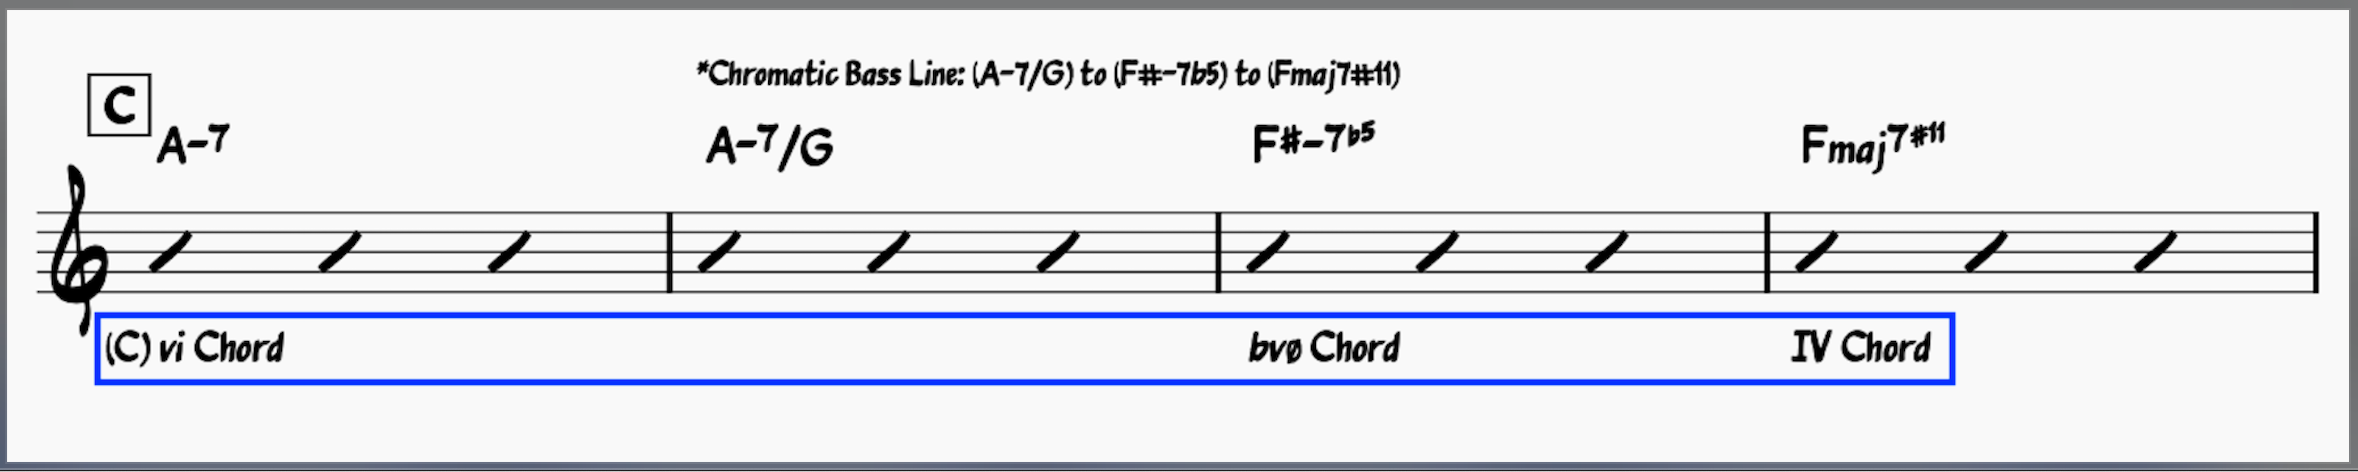 Moon River chords: First four measure of the C section of Moon River 